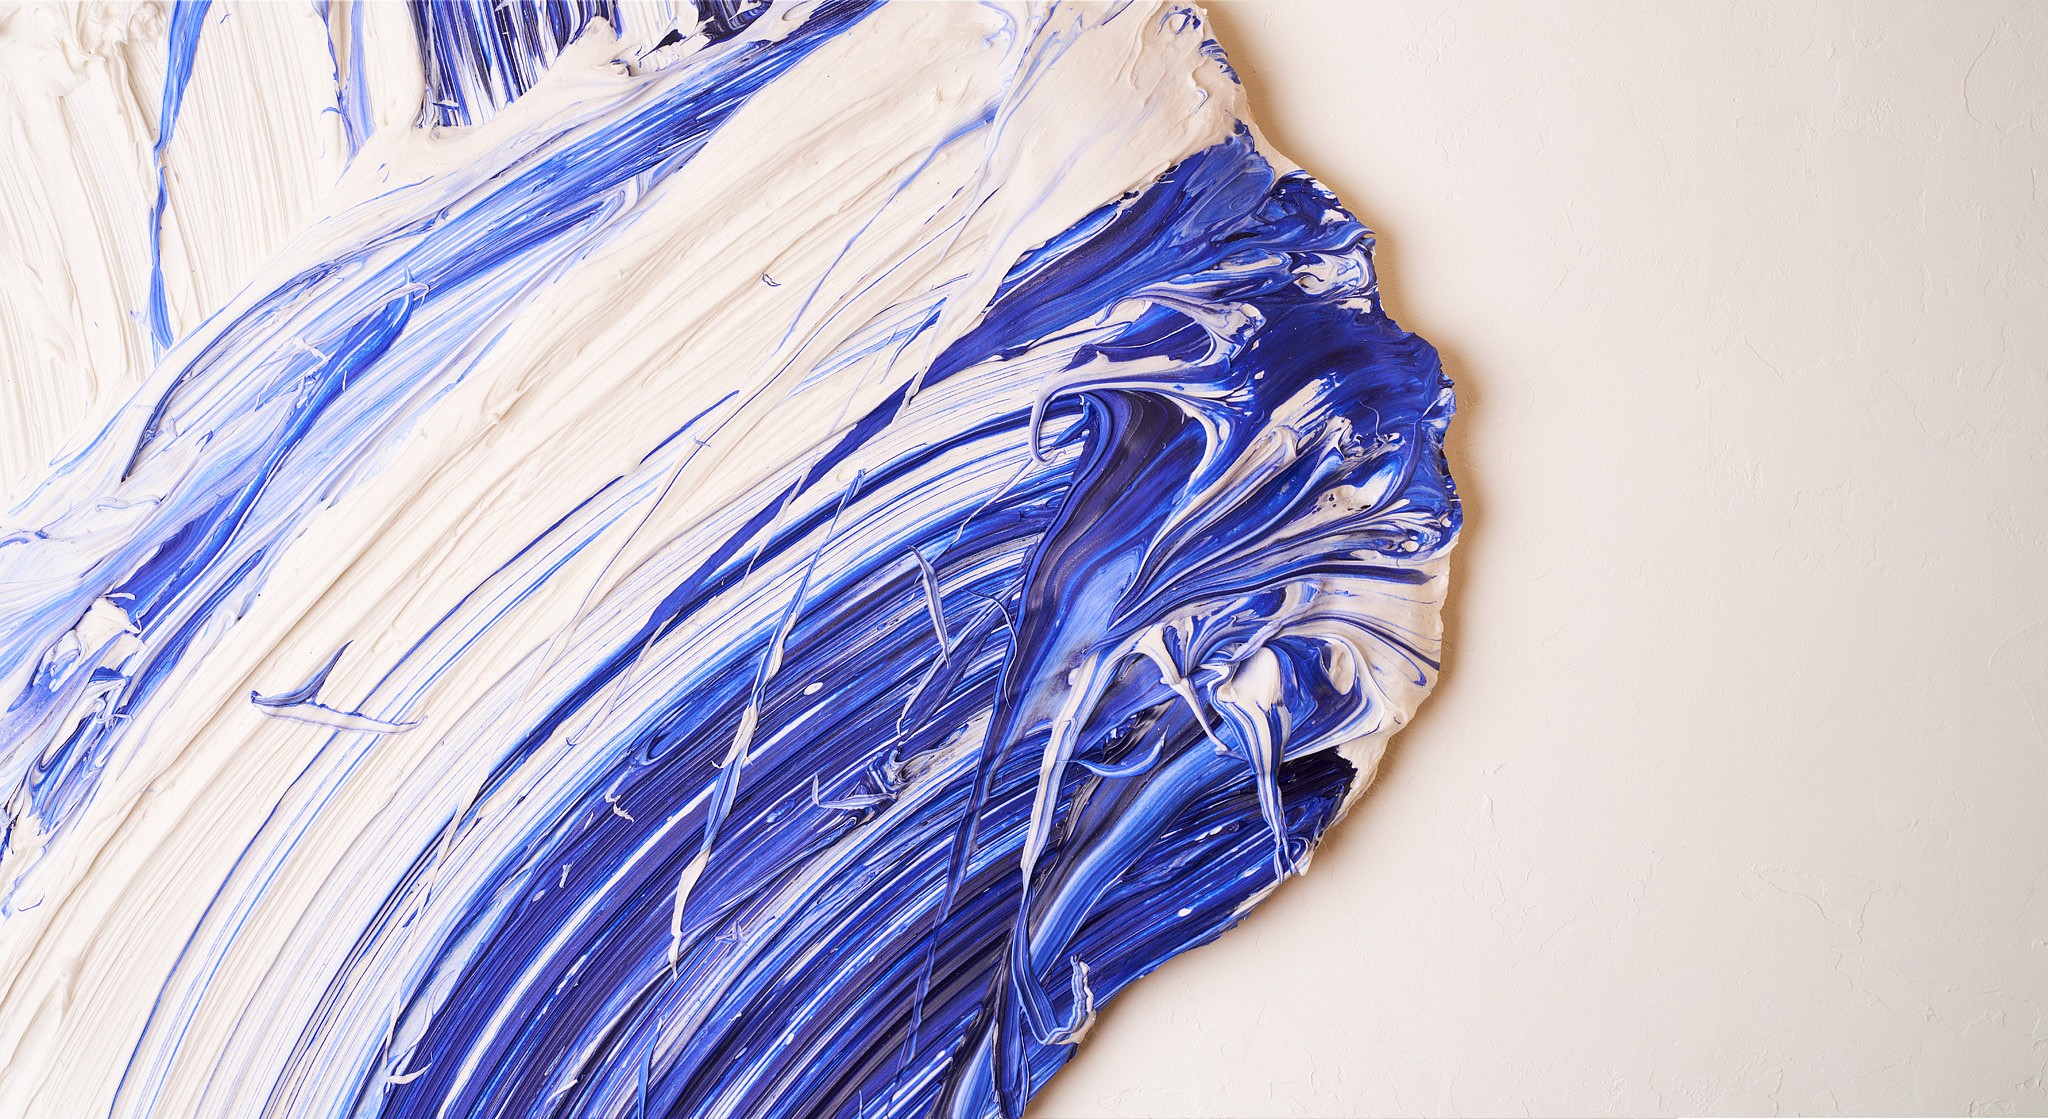 PRESS RELEASE: DONALD MARTINY: Praxis + Poesis
, Jul 18 - Aug  7, 2019